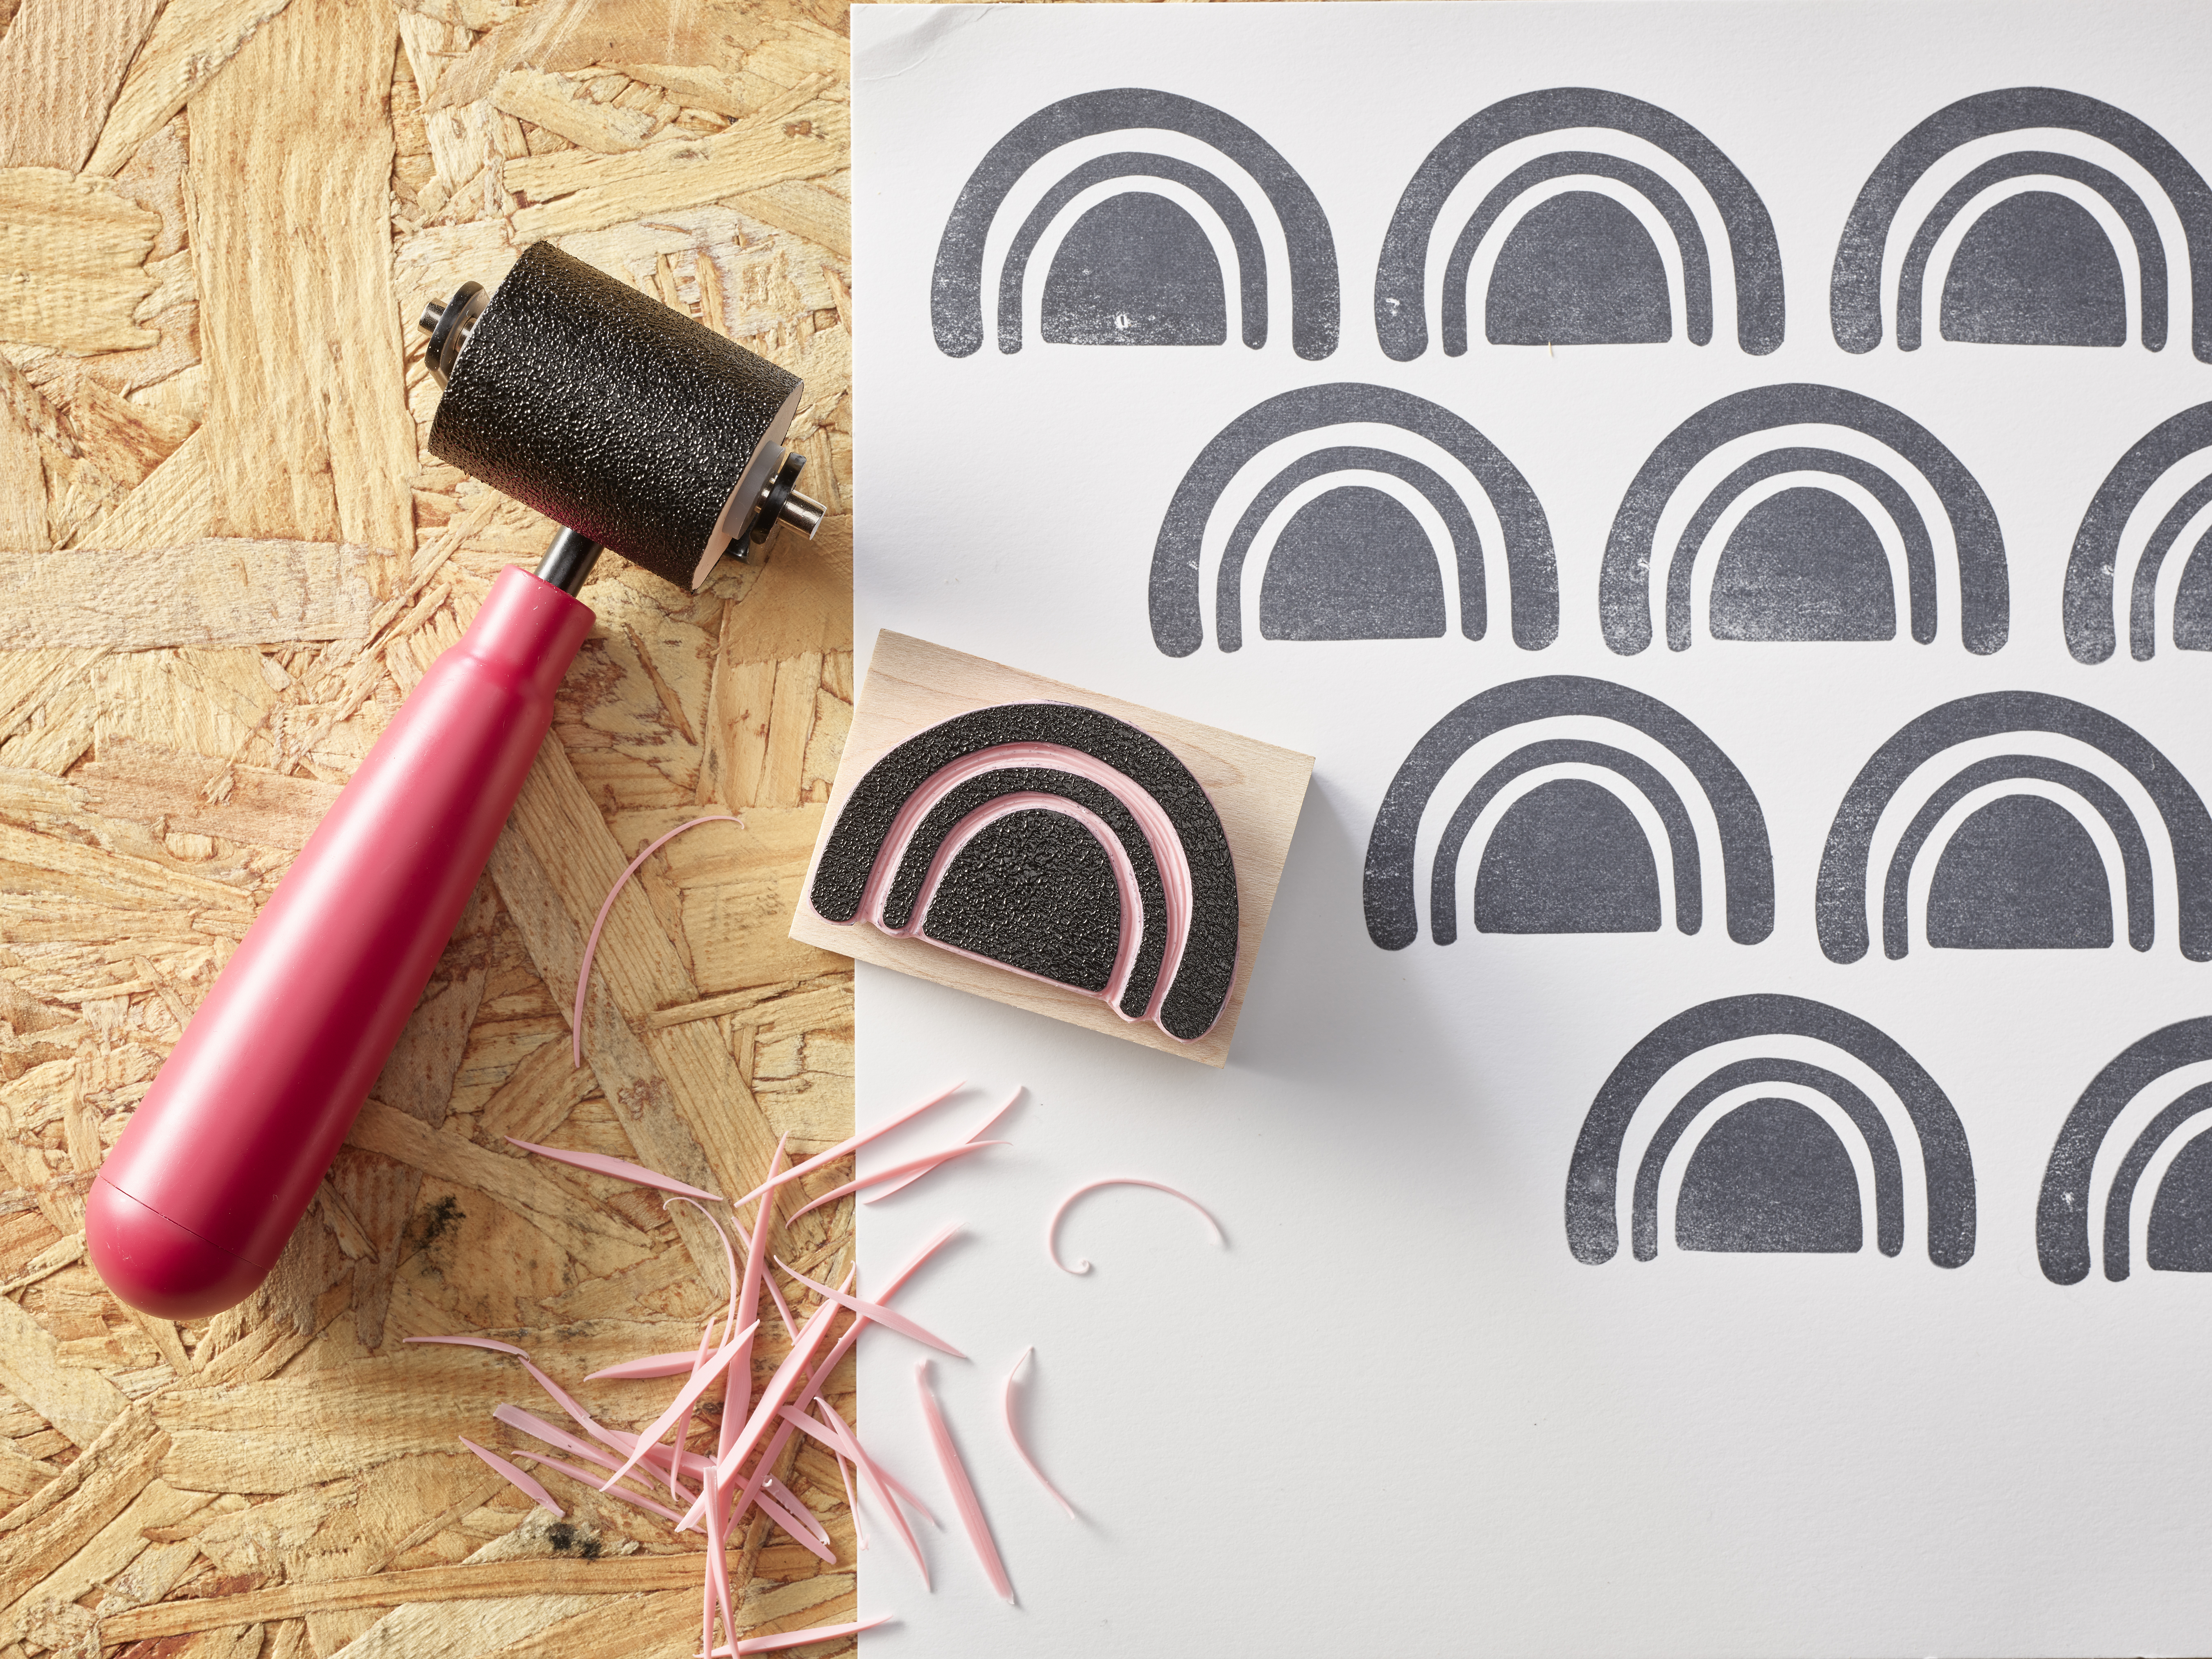 Speedy-Carve Rainbow Stamp mounted with Prints